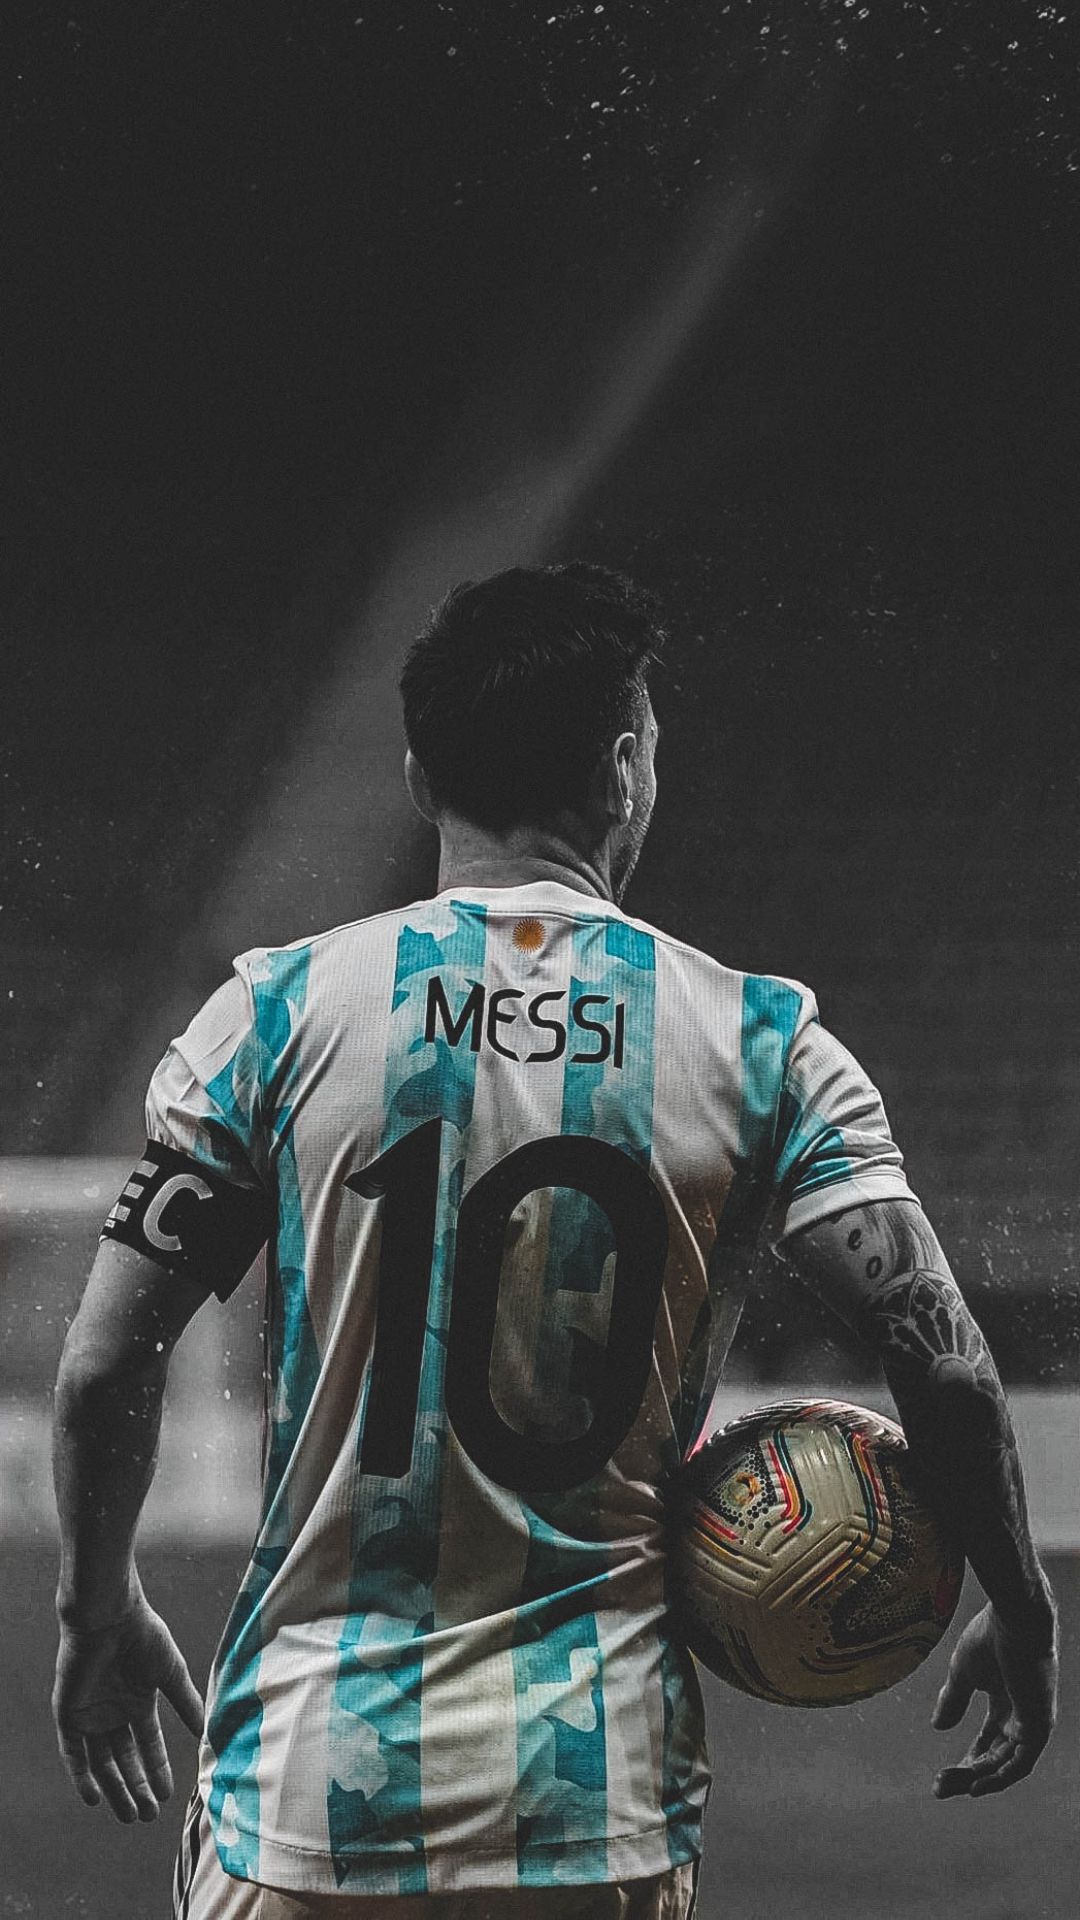 Argentina Wallpapers: Show your love for Argentina and Lionel Messi by downloading these beautiful wallpapers today. Click here to add some football flair to your devices.